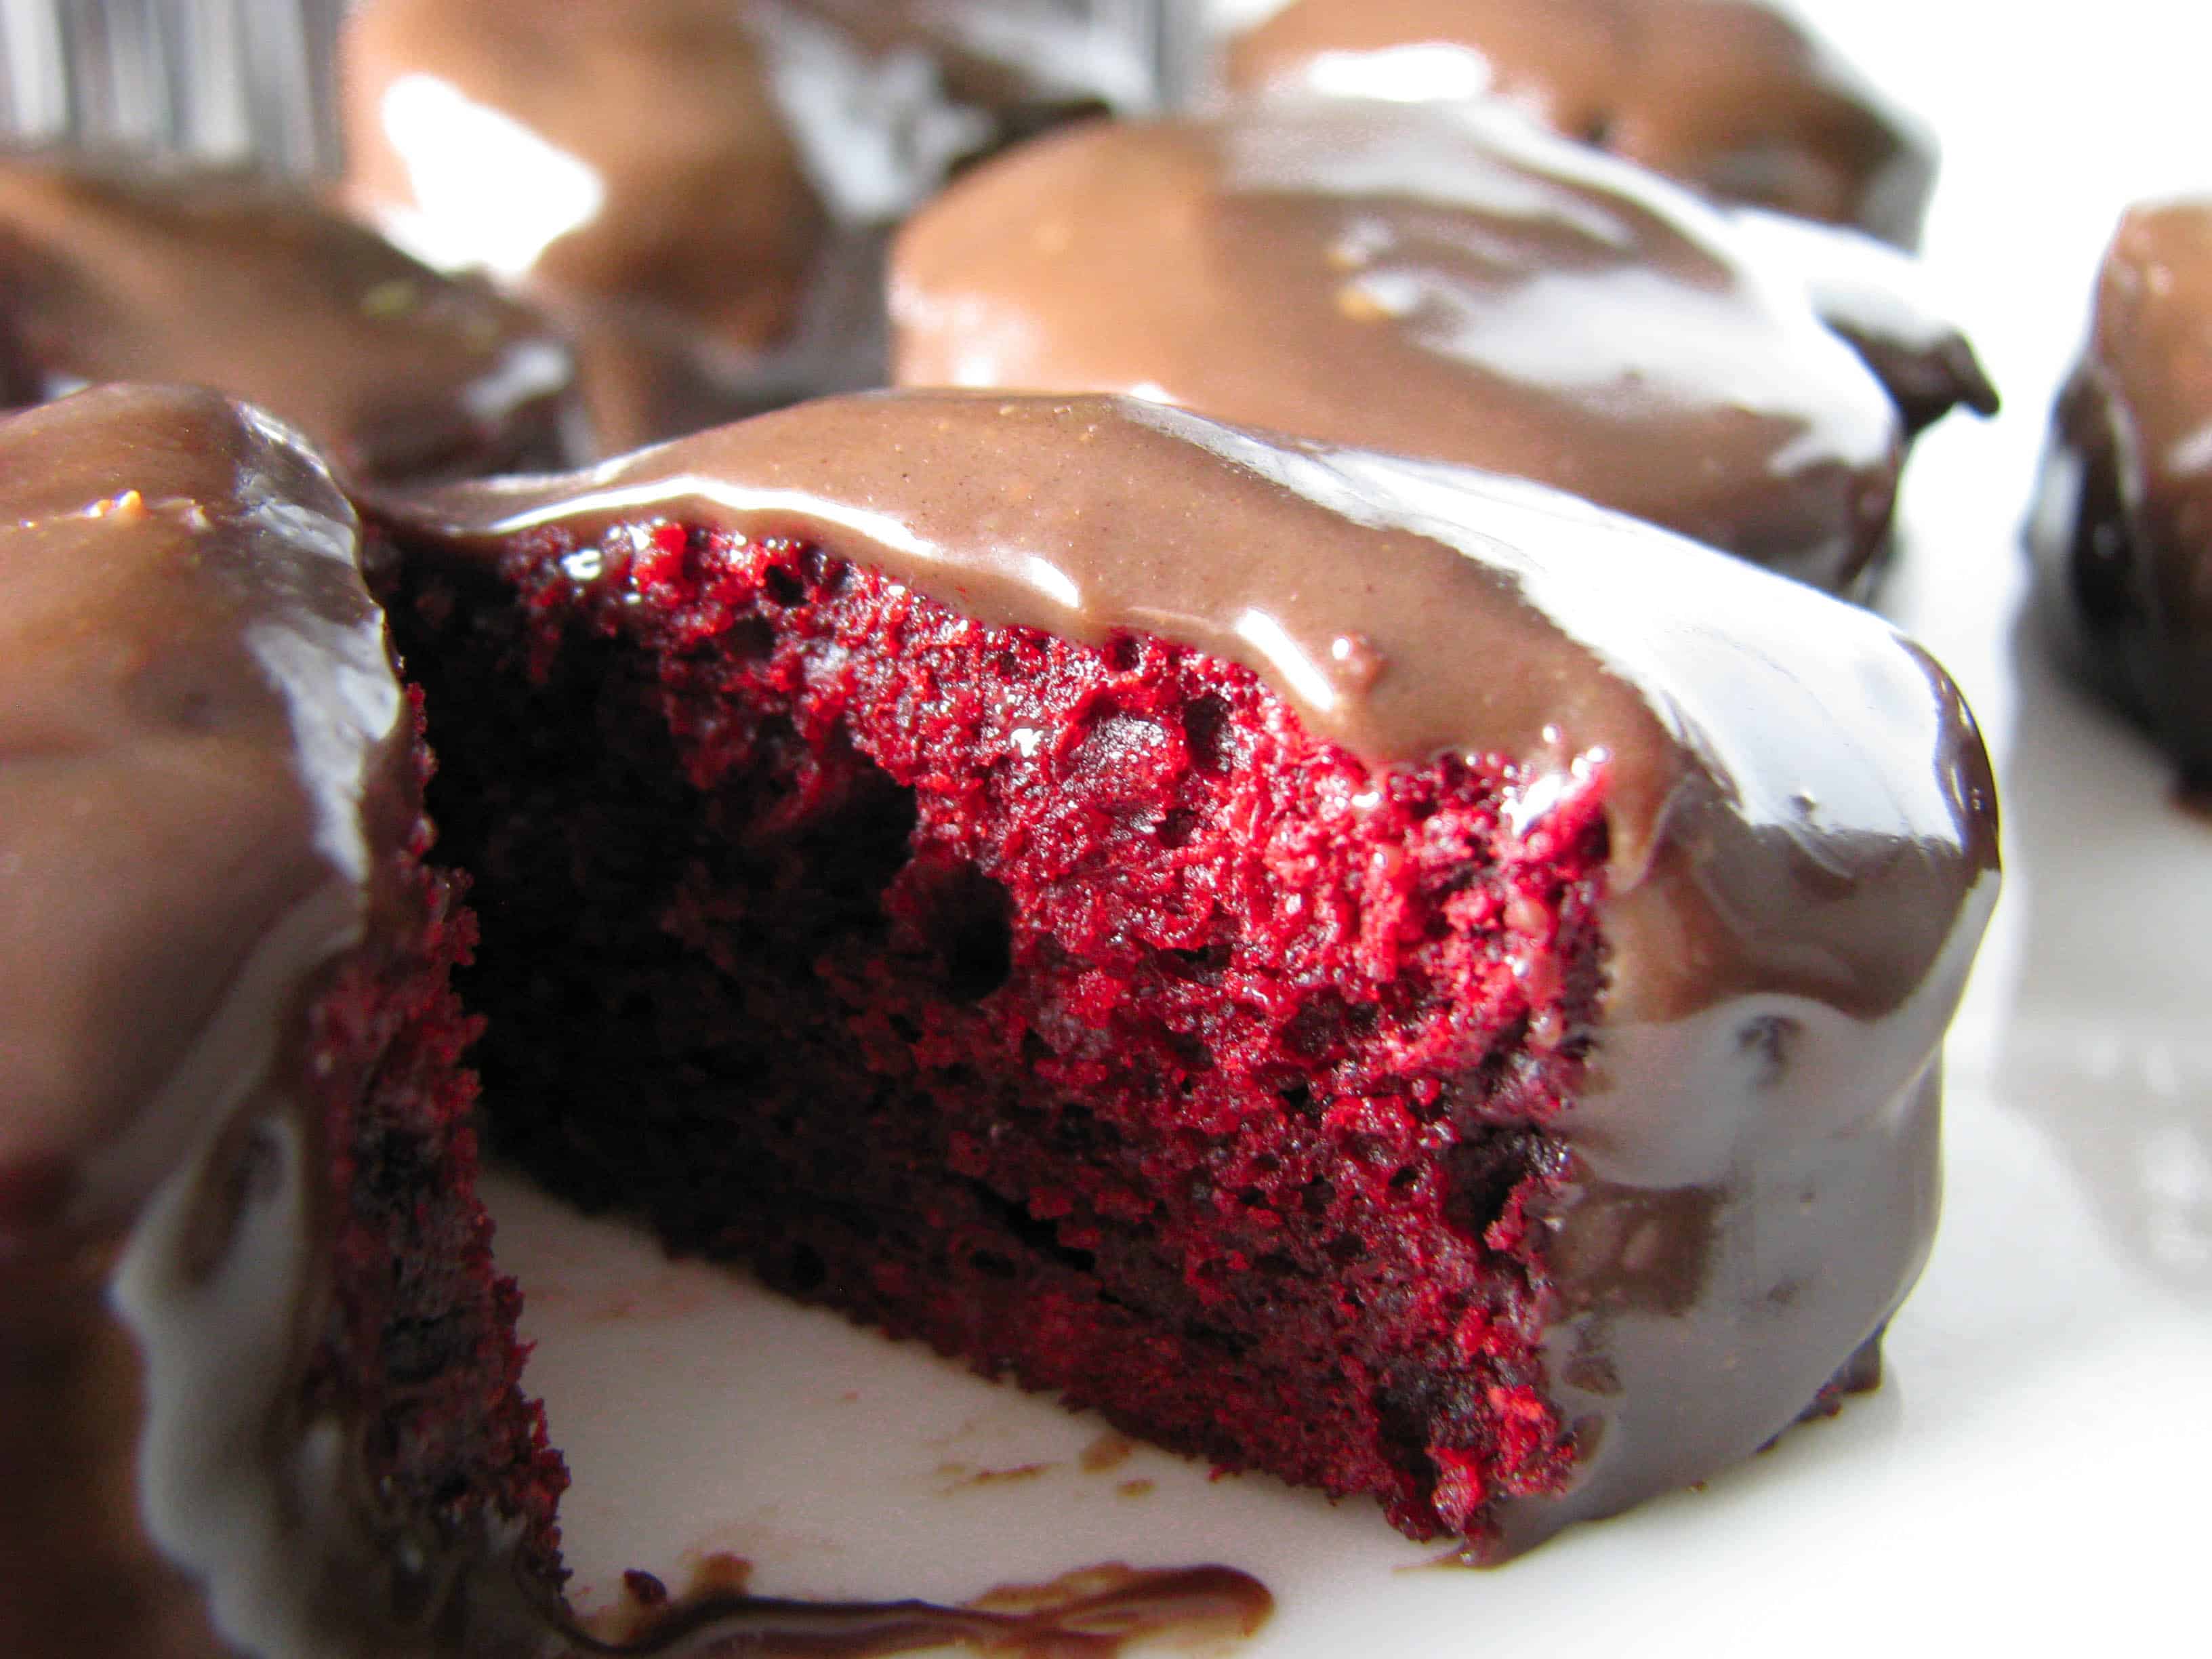 Red velvet heartcakes drenched in chocolate.